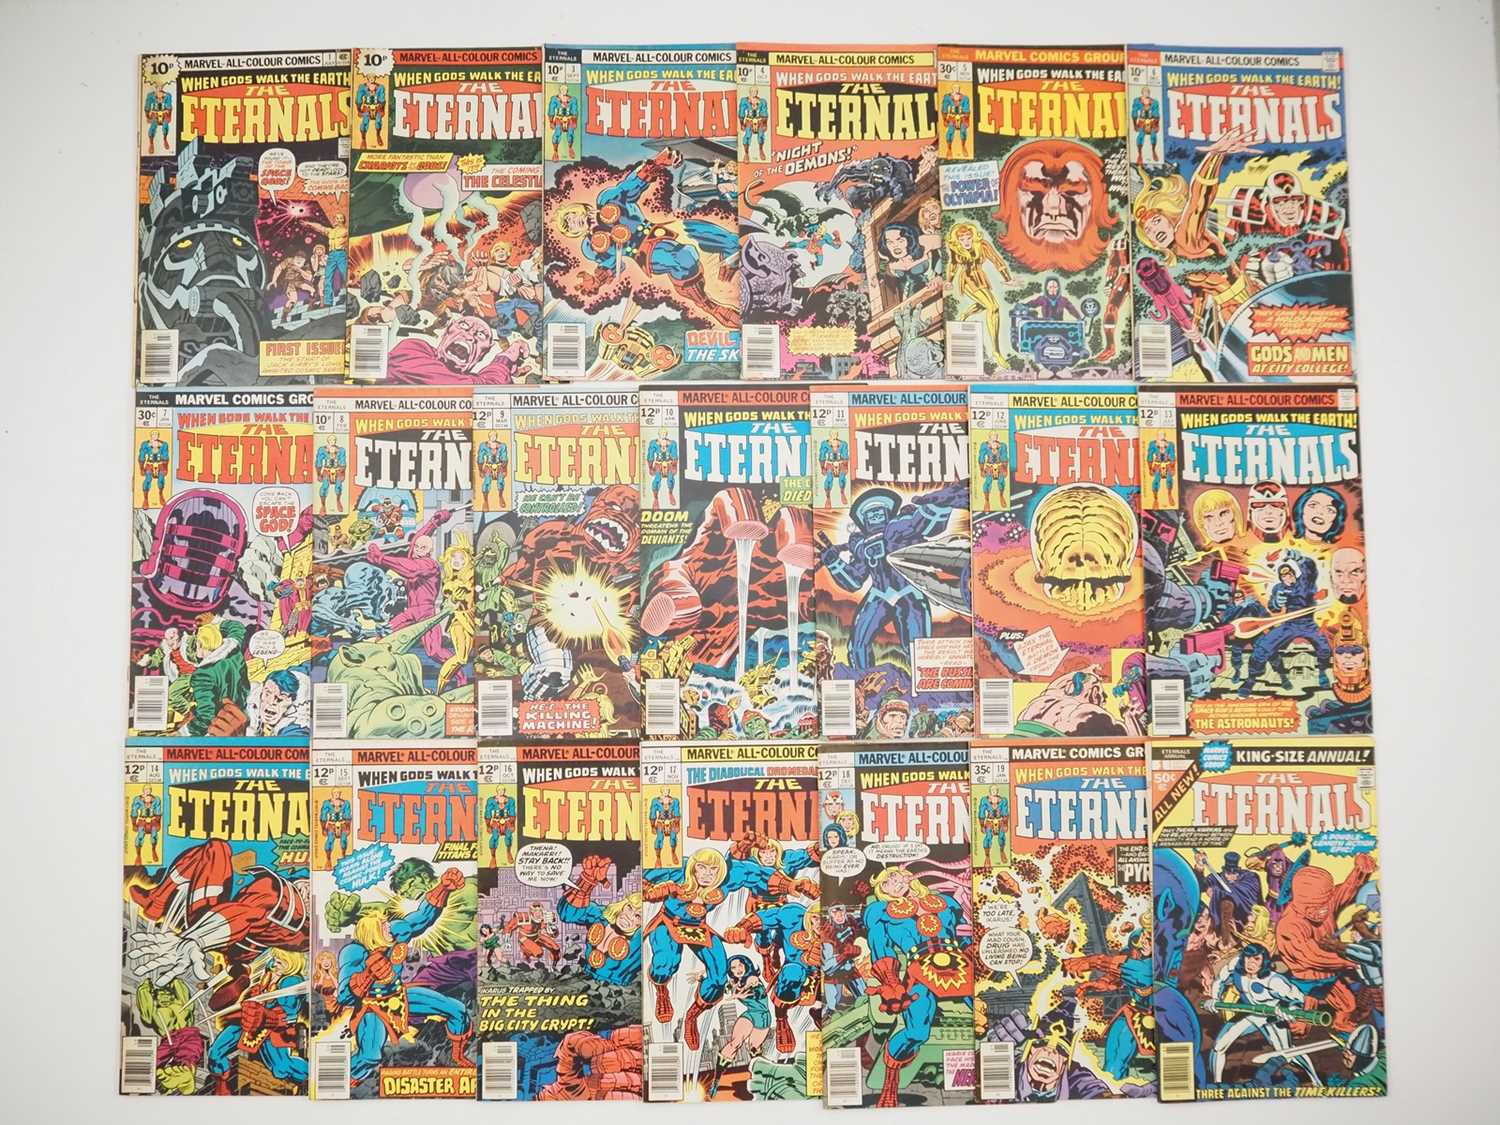 ETERNALS #1, 2, 3, 4, 5, 6, 7, 8, 9, 10, 11, 12, 13,14, 15, 16, 17, 18, 19 + ANNUAL #1 - (20 in Lot)